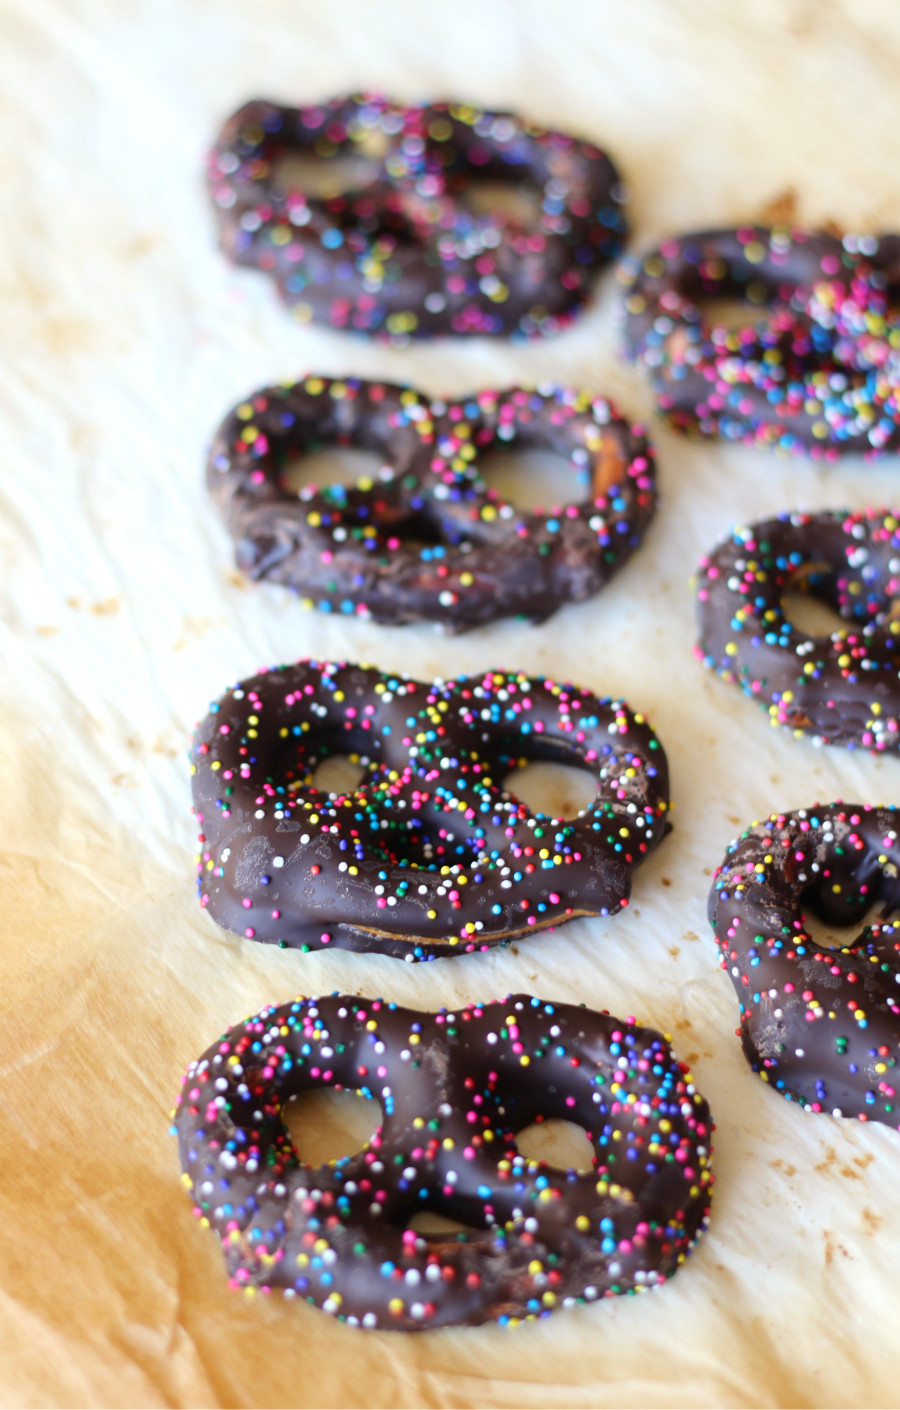 Gluten Free Chocolate Covered Pretzels
 Easy Gluten Free Chocolate Covered Pretzels Allergy Free